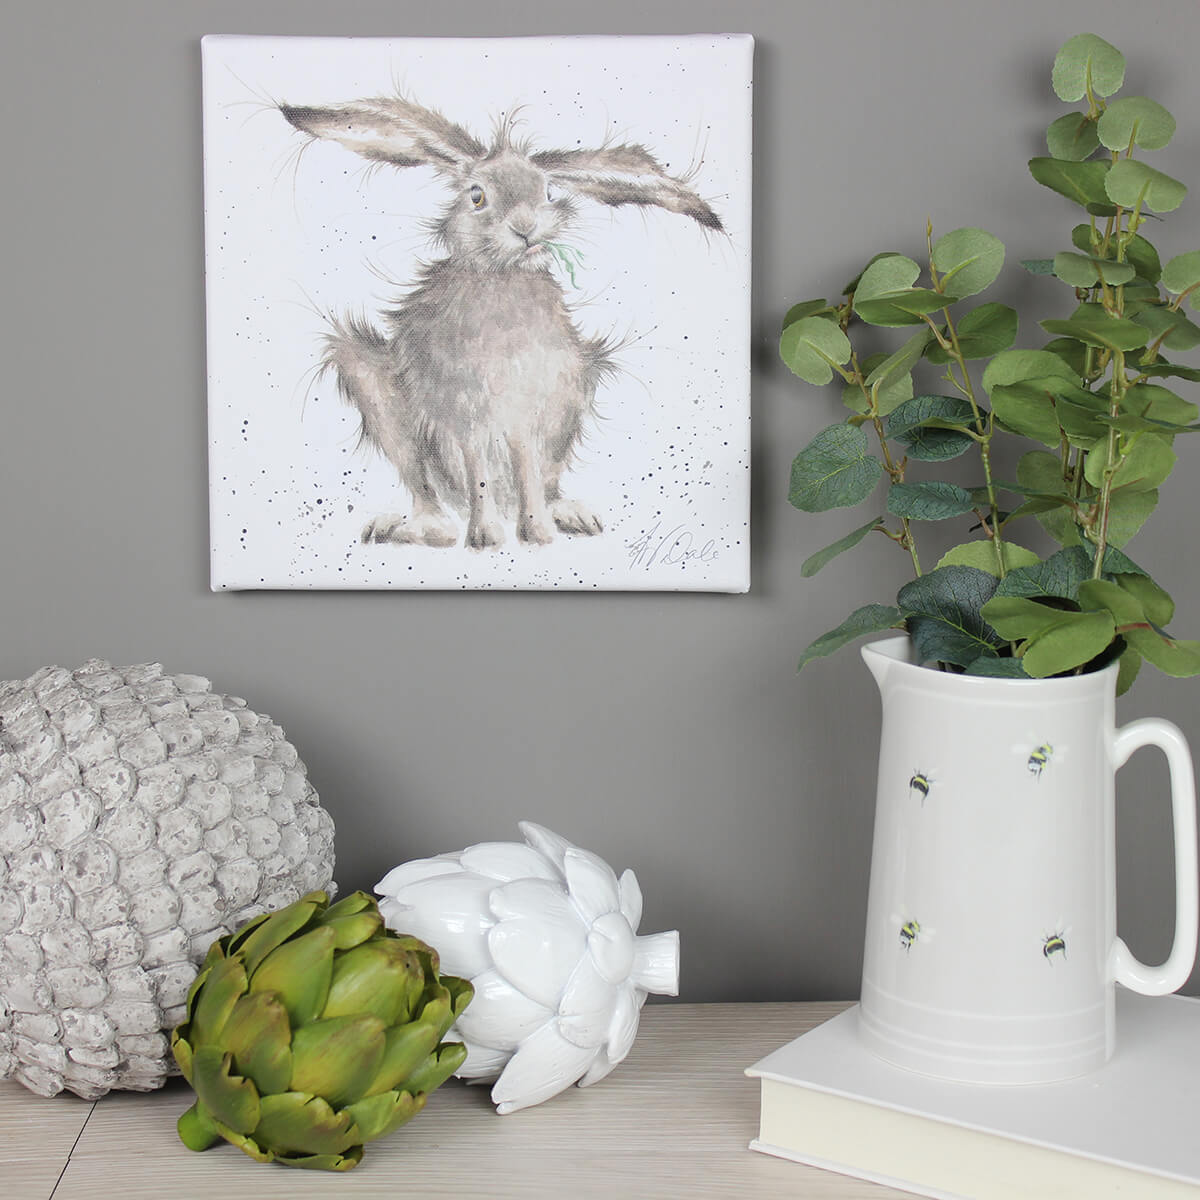 Hare Brained 20cm Canvas Print